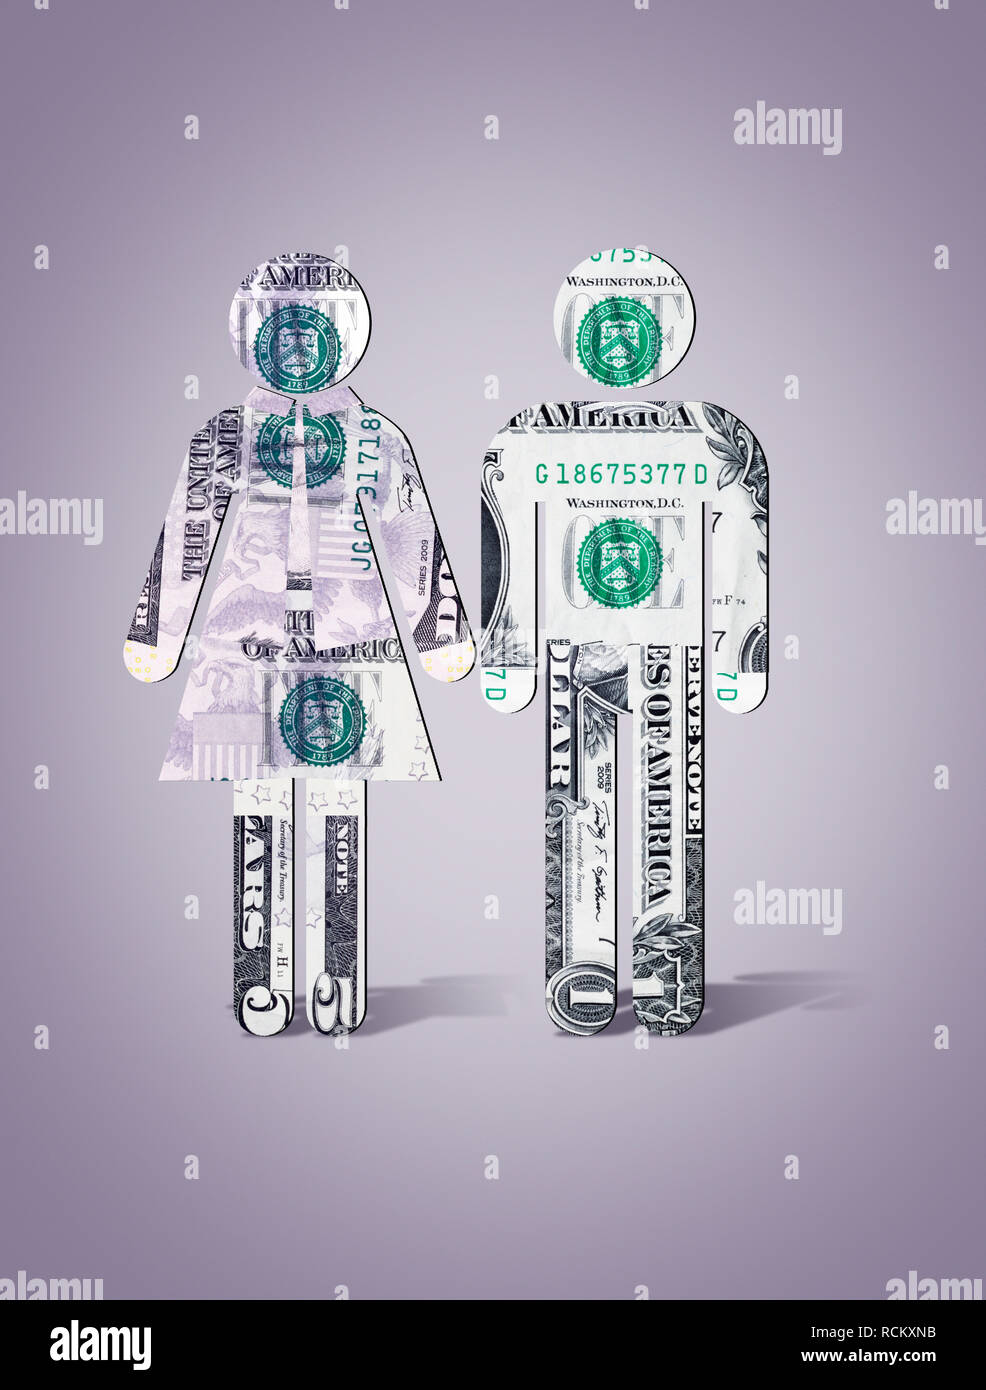 US dollar banknotes in shape of man and woman standing side by side, computer generated image, grey background Stock Photo